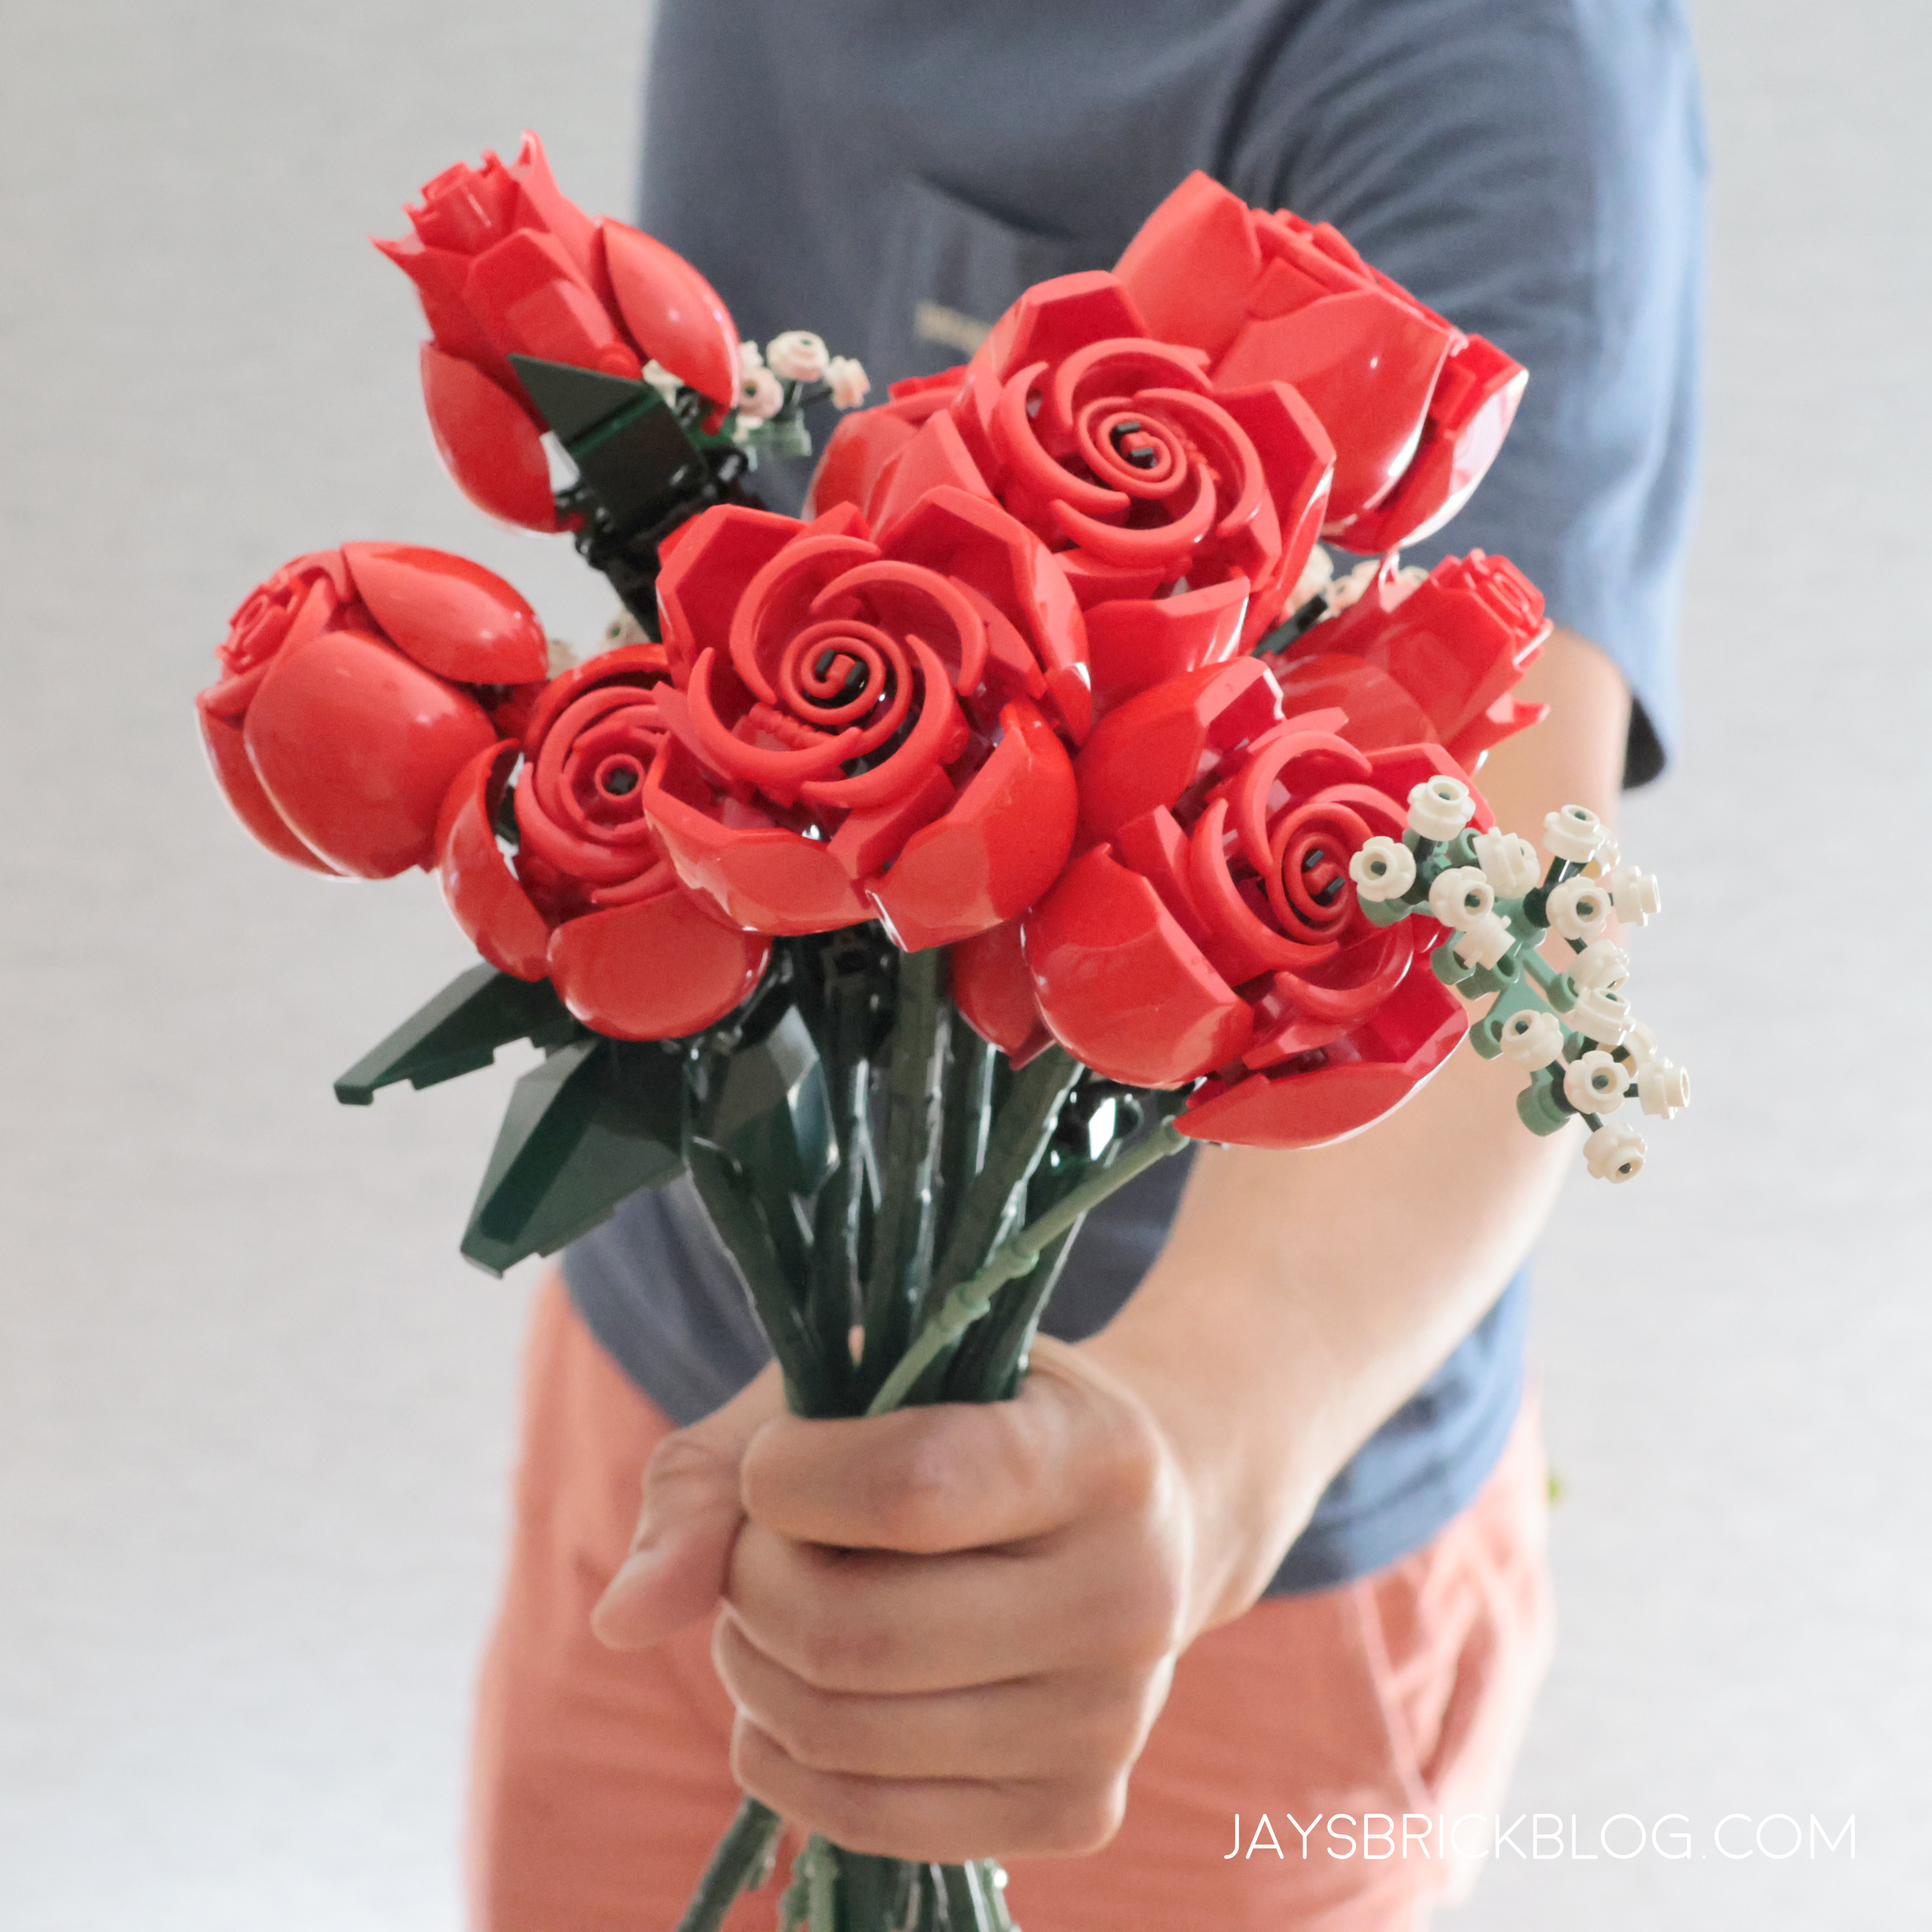 LEGO Bouquet of Roses: Release date, where to buy, price, and more